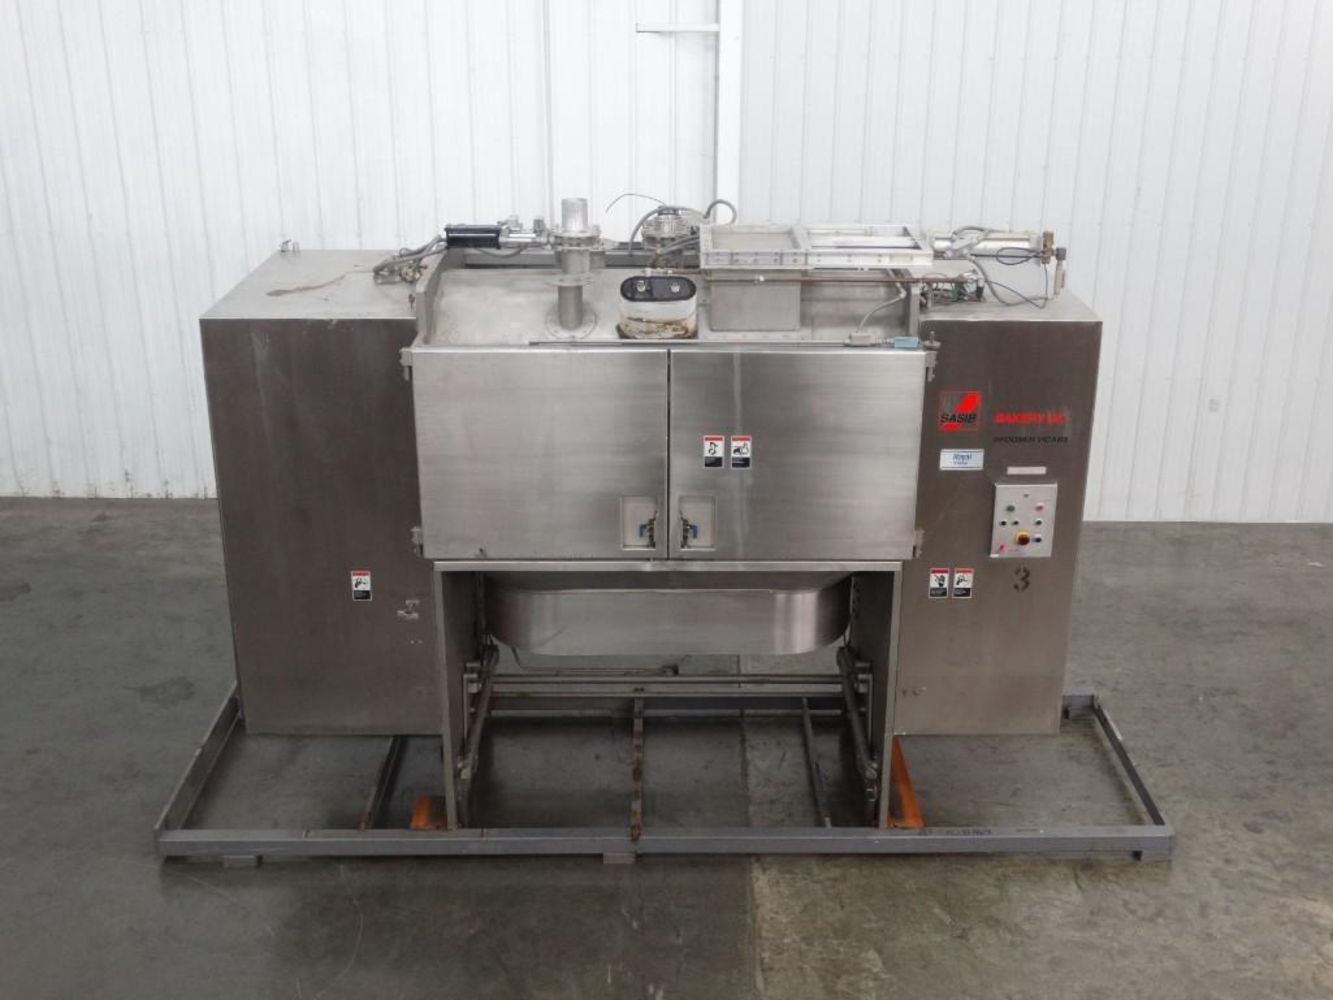 Premium Food and Beverage Packaging and Processing Equipment Auction: Bakery, Snack Foods, Meat, & Pharmaceutical/Nutraceutical Industries